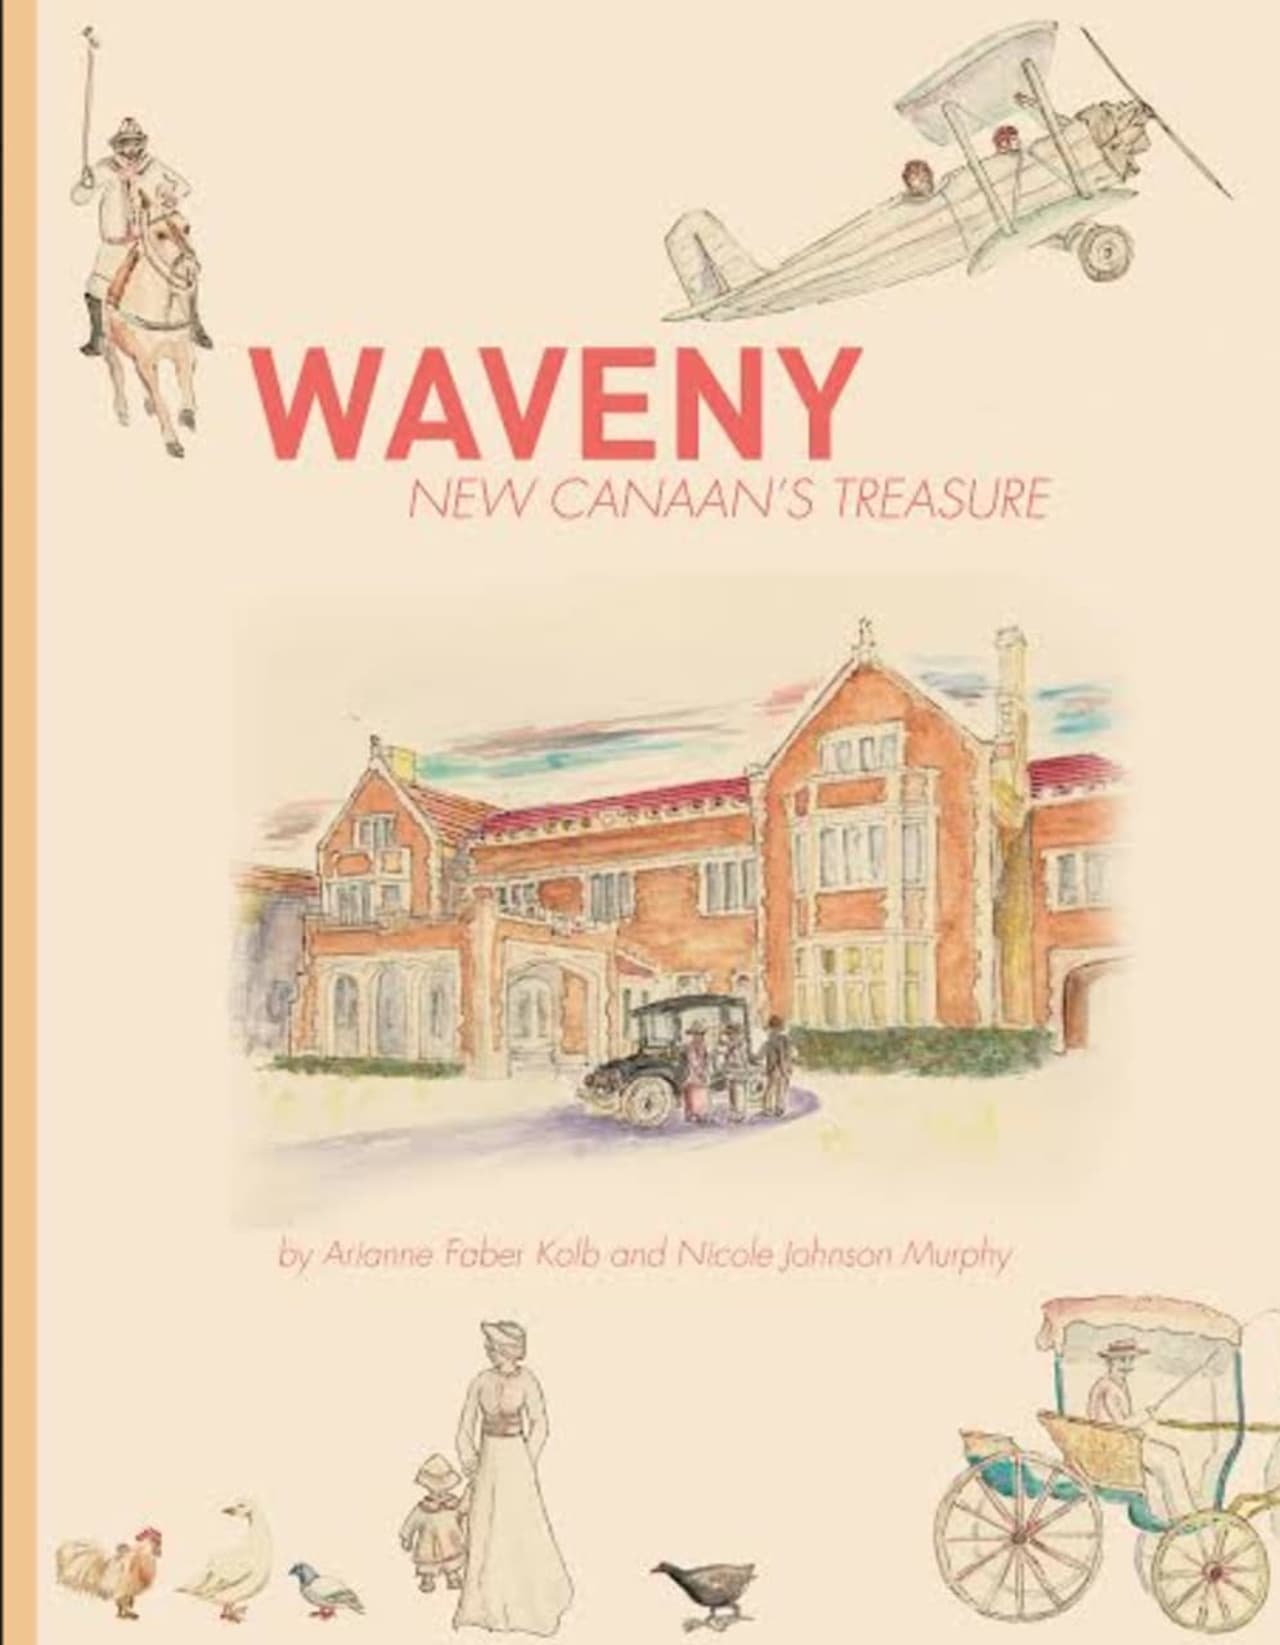 The New Canaan Preservation Alliance and the Town of New Canaan are hosting a Waveny Book Launch and Celebration of the children’s book "Waveny: New Canaan’s Treasure," written by Arianne Faber Kolb.